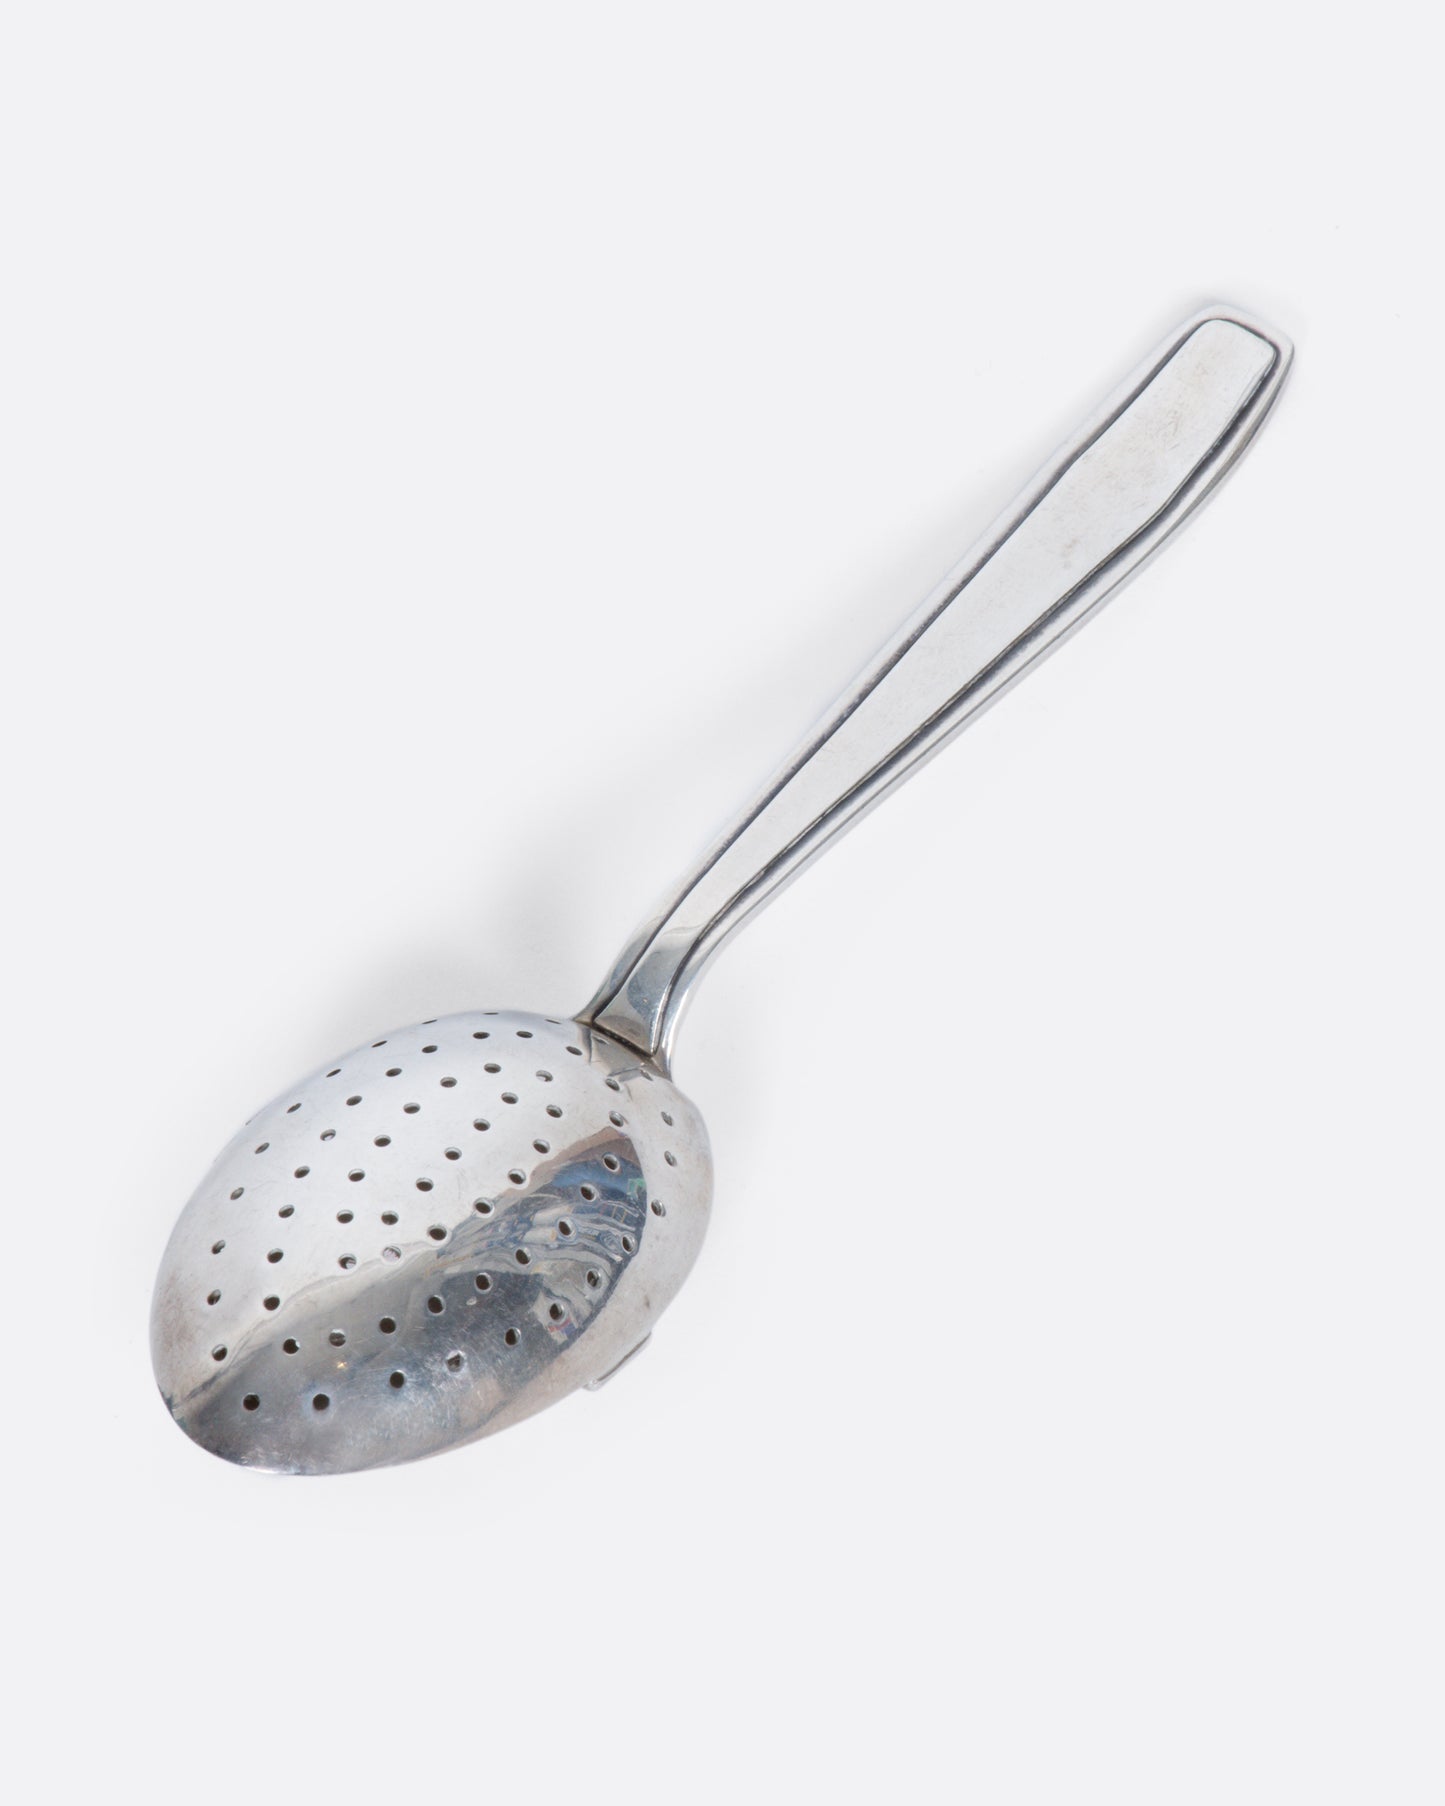 A perforated sterling silver spoon with a hinged perforated lid to create a tea diffuser.